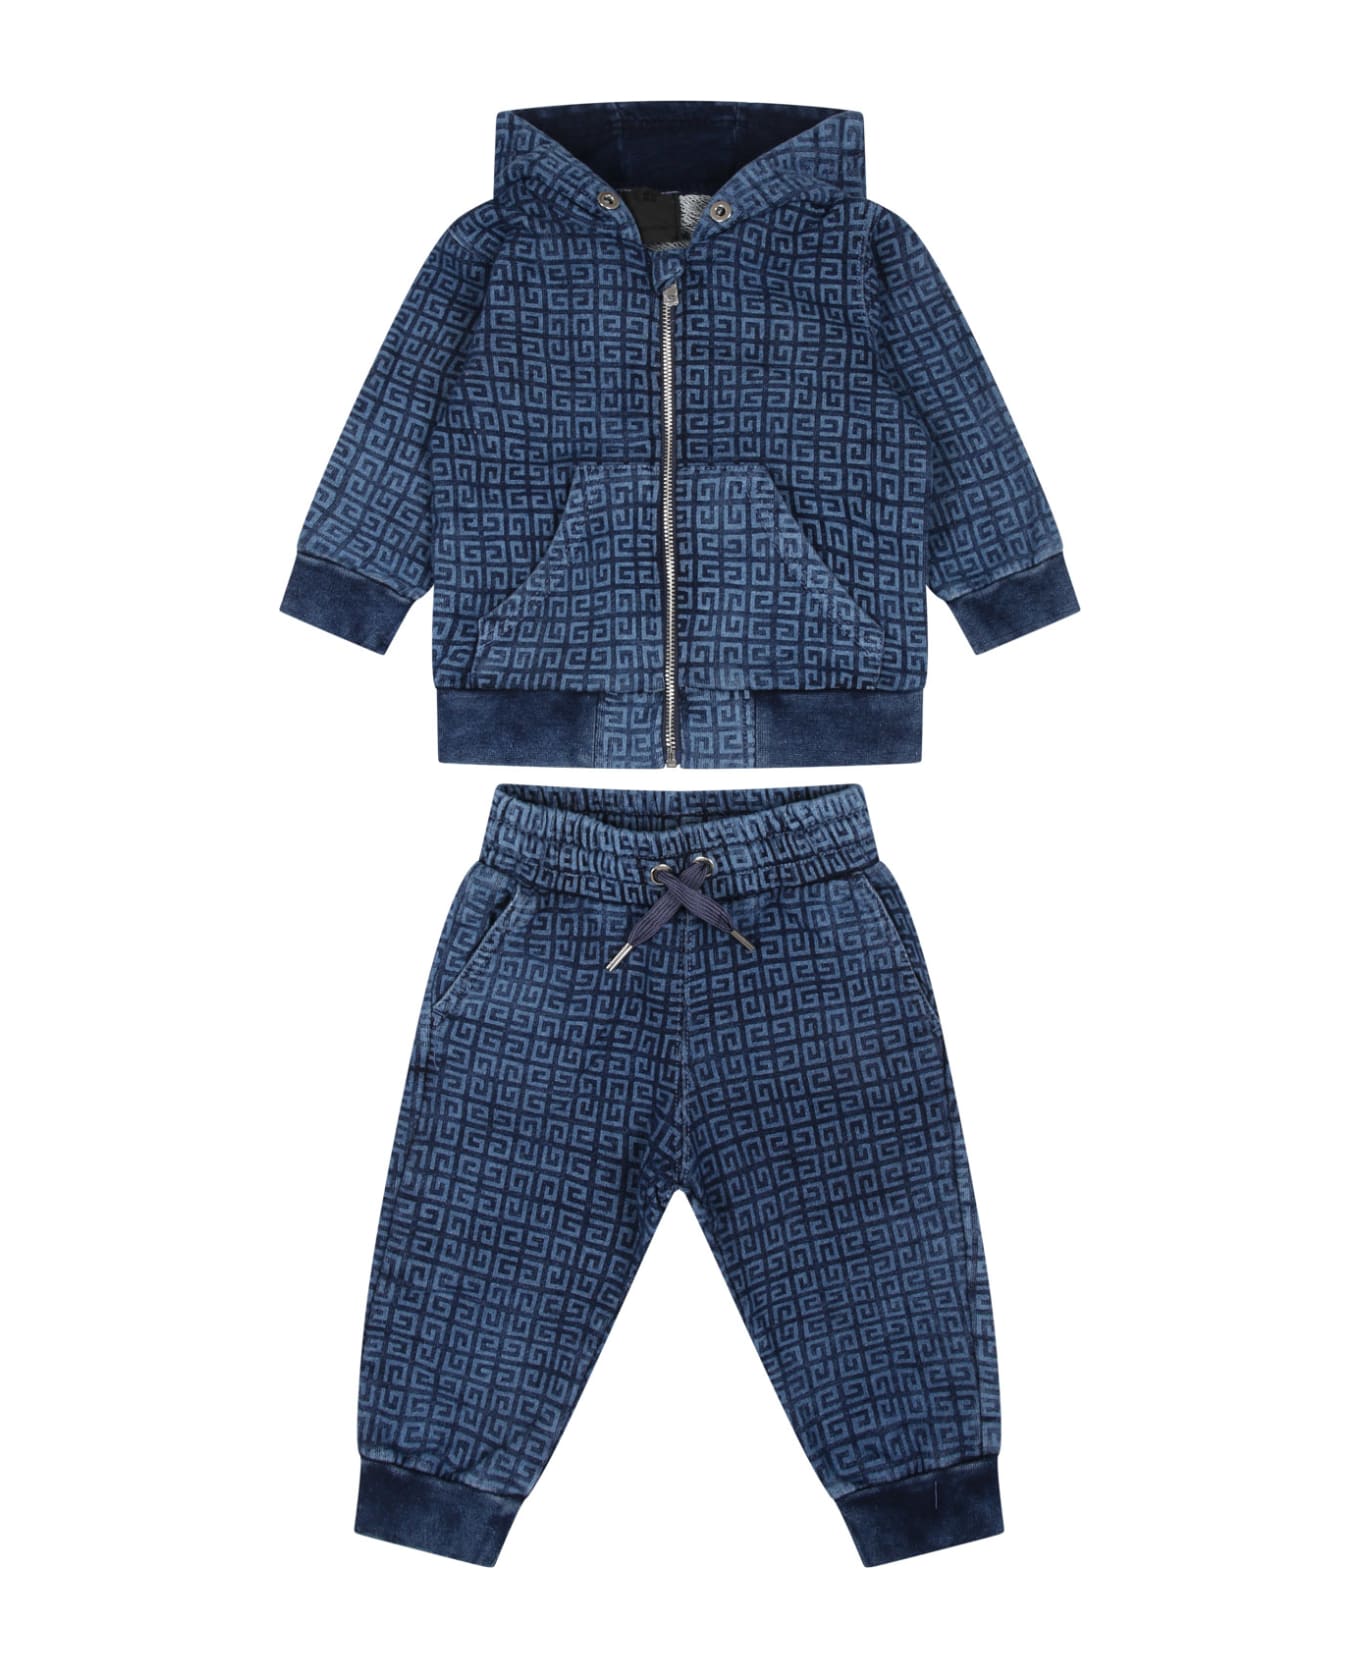 Givenchy Trunks Blue Suit For Baby Boy With 4g Motif - Blue